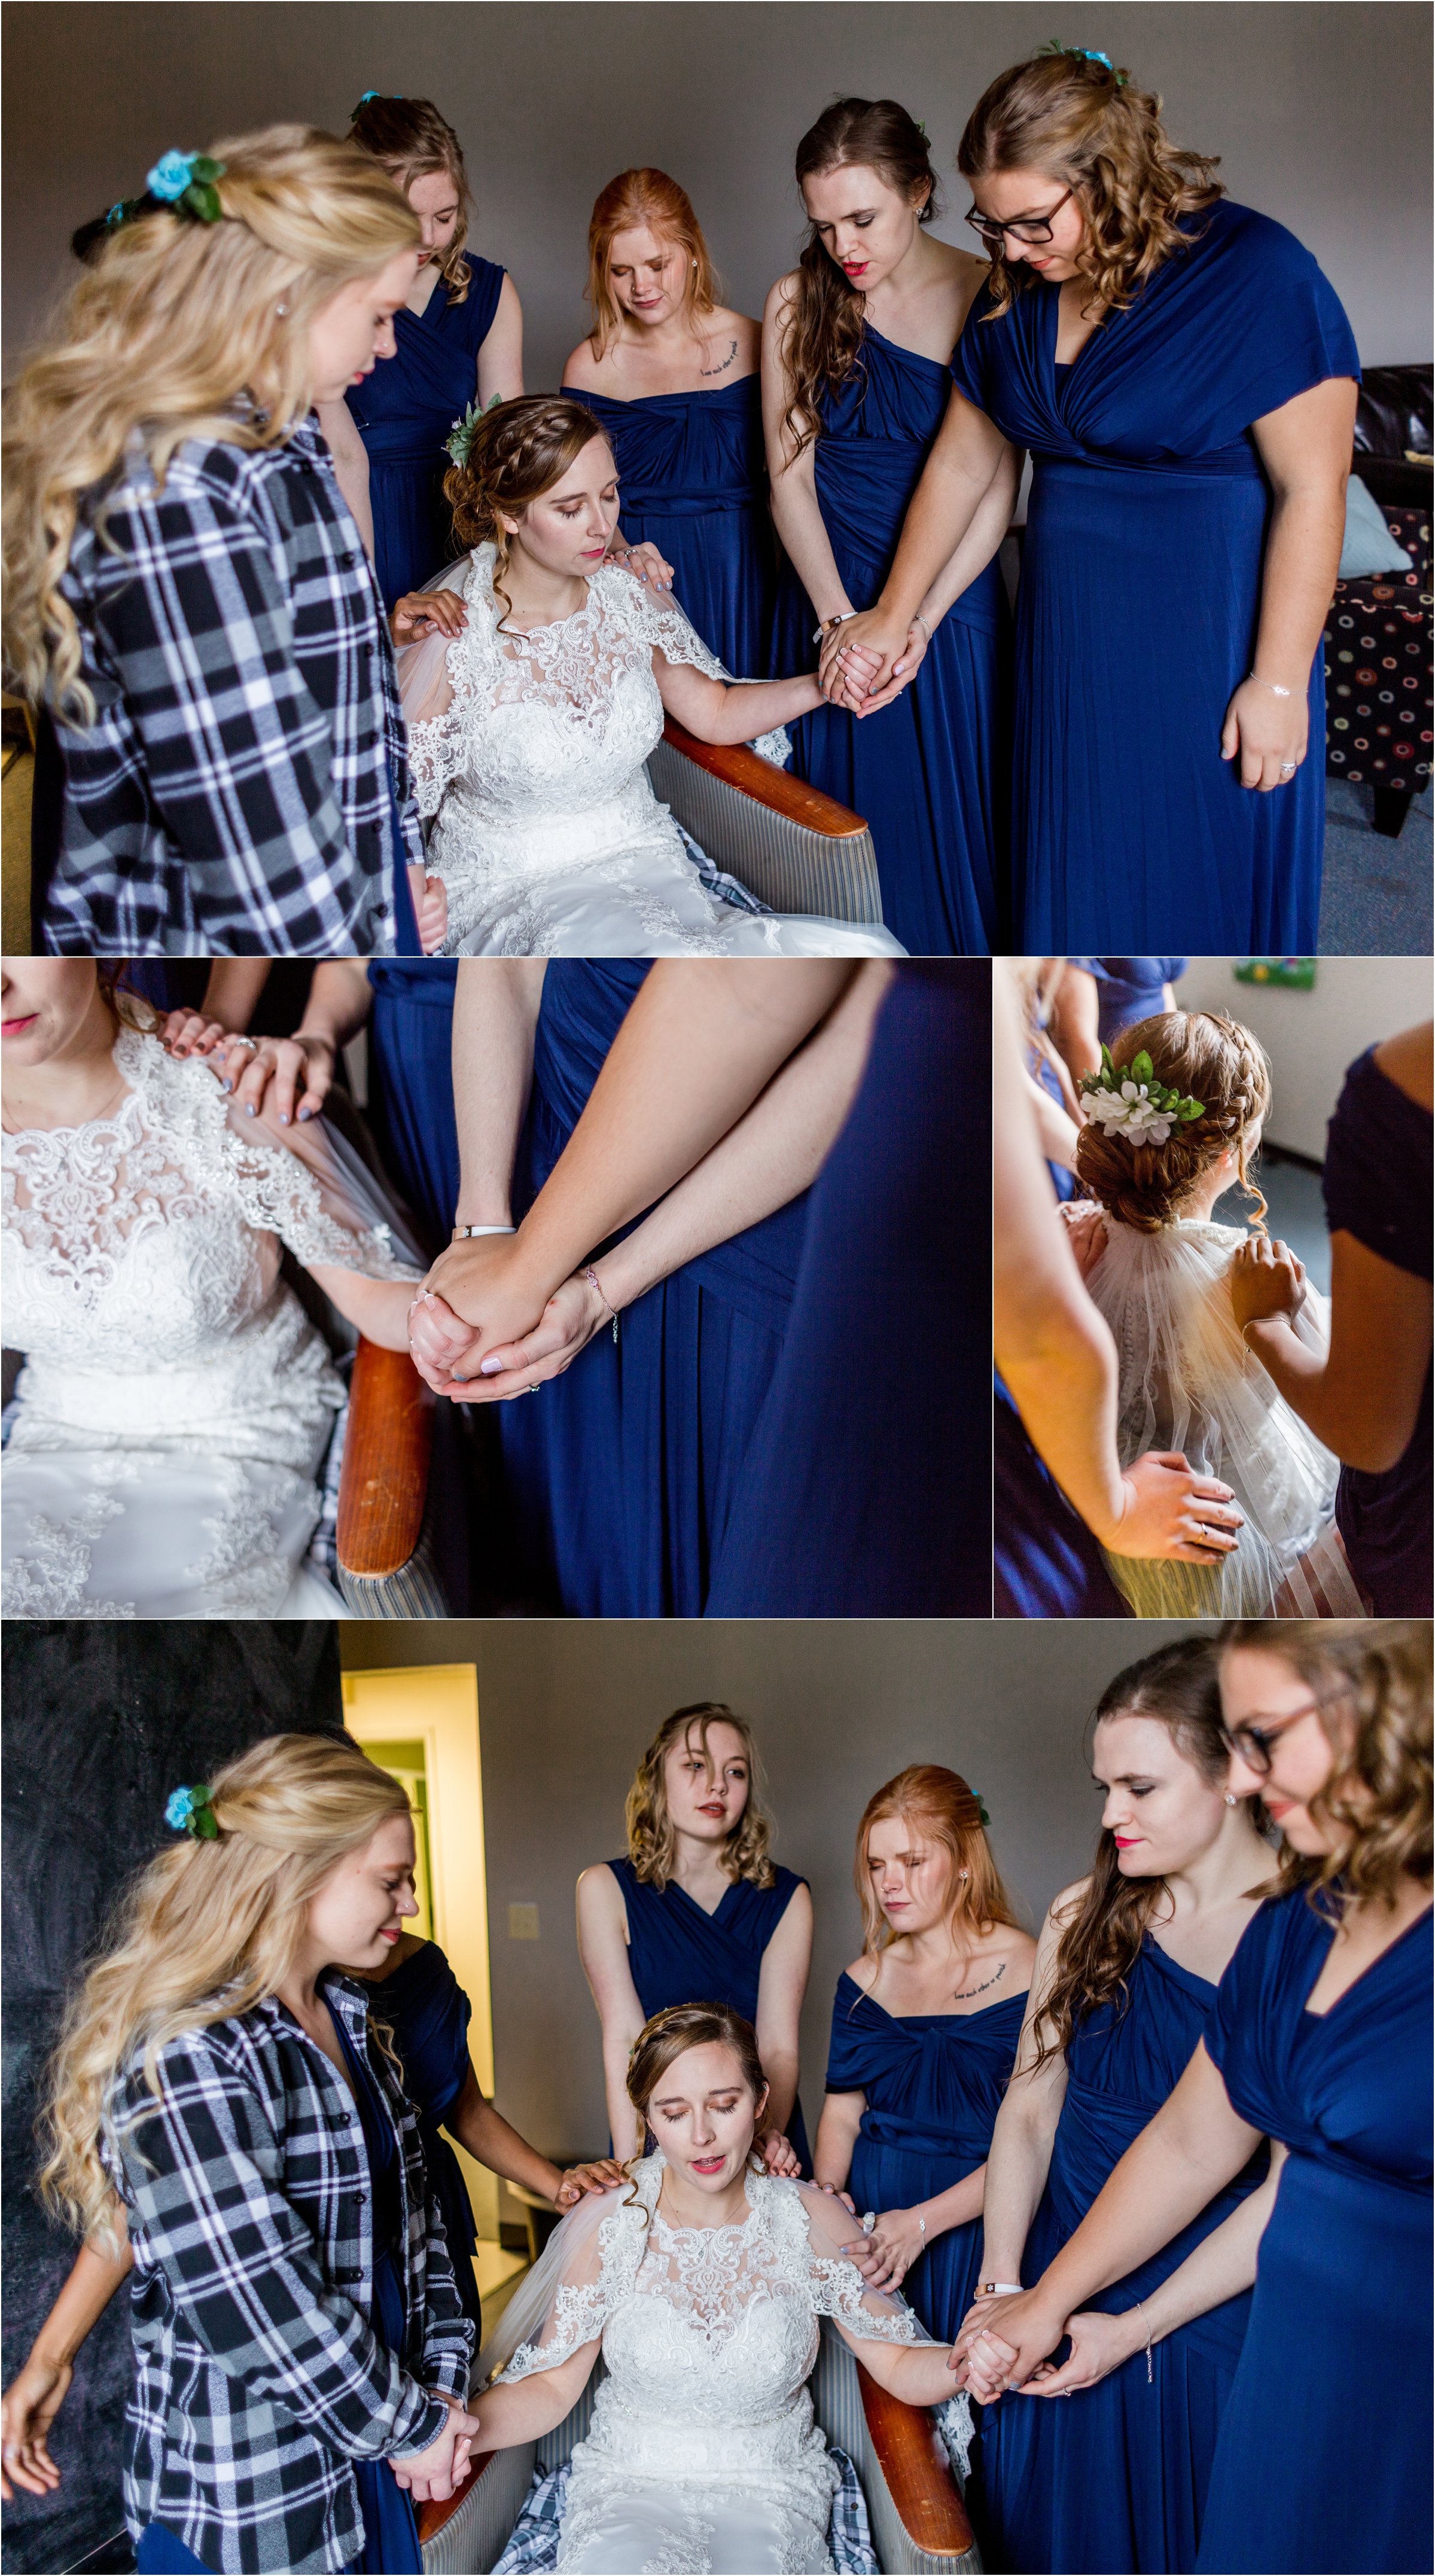 bridesmaids take a moment to pray over bride before wedding day begins